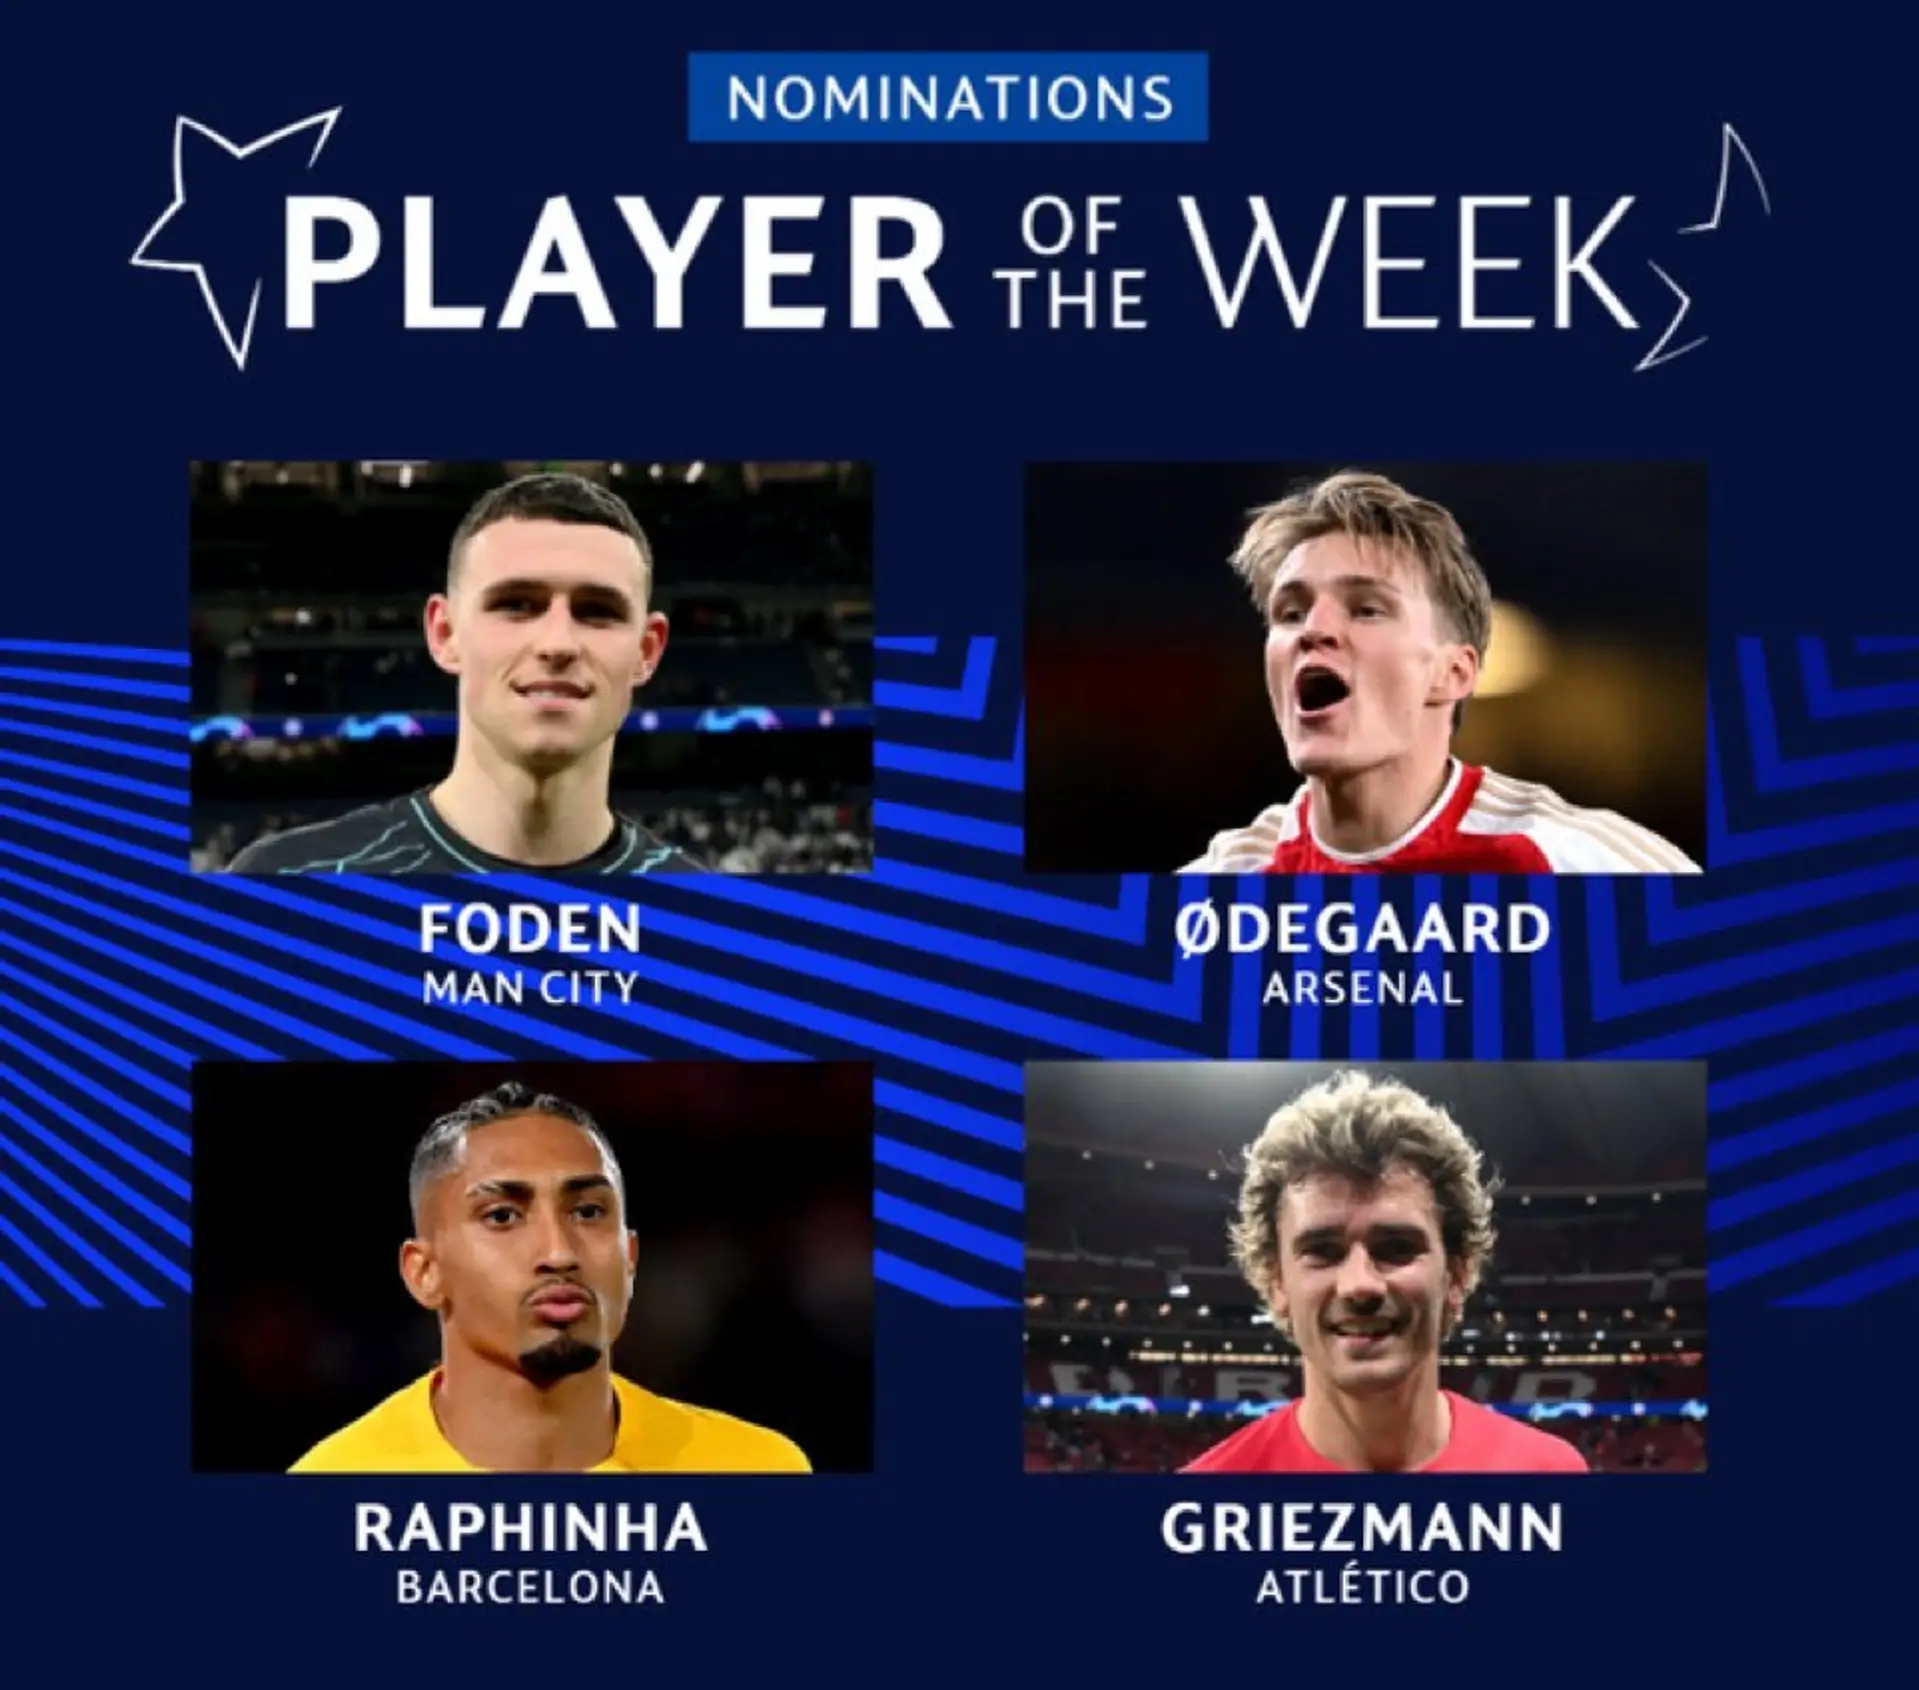 💥 Official: Raphinha is nominated for the Champions League player of the week award: